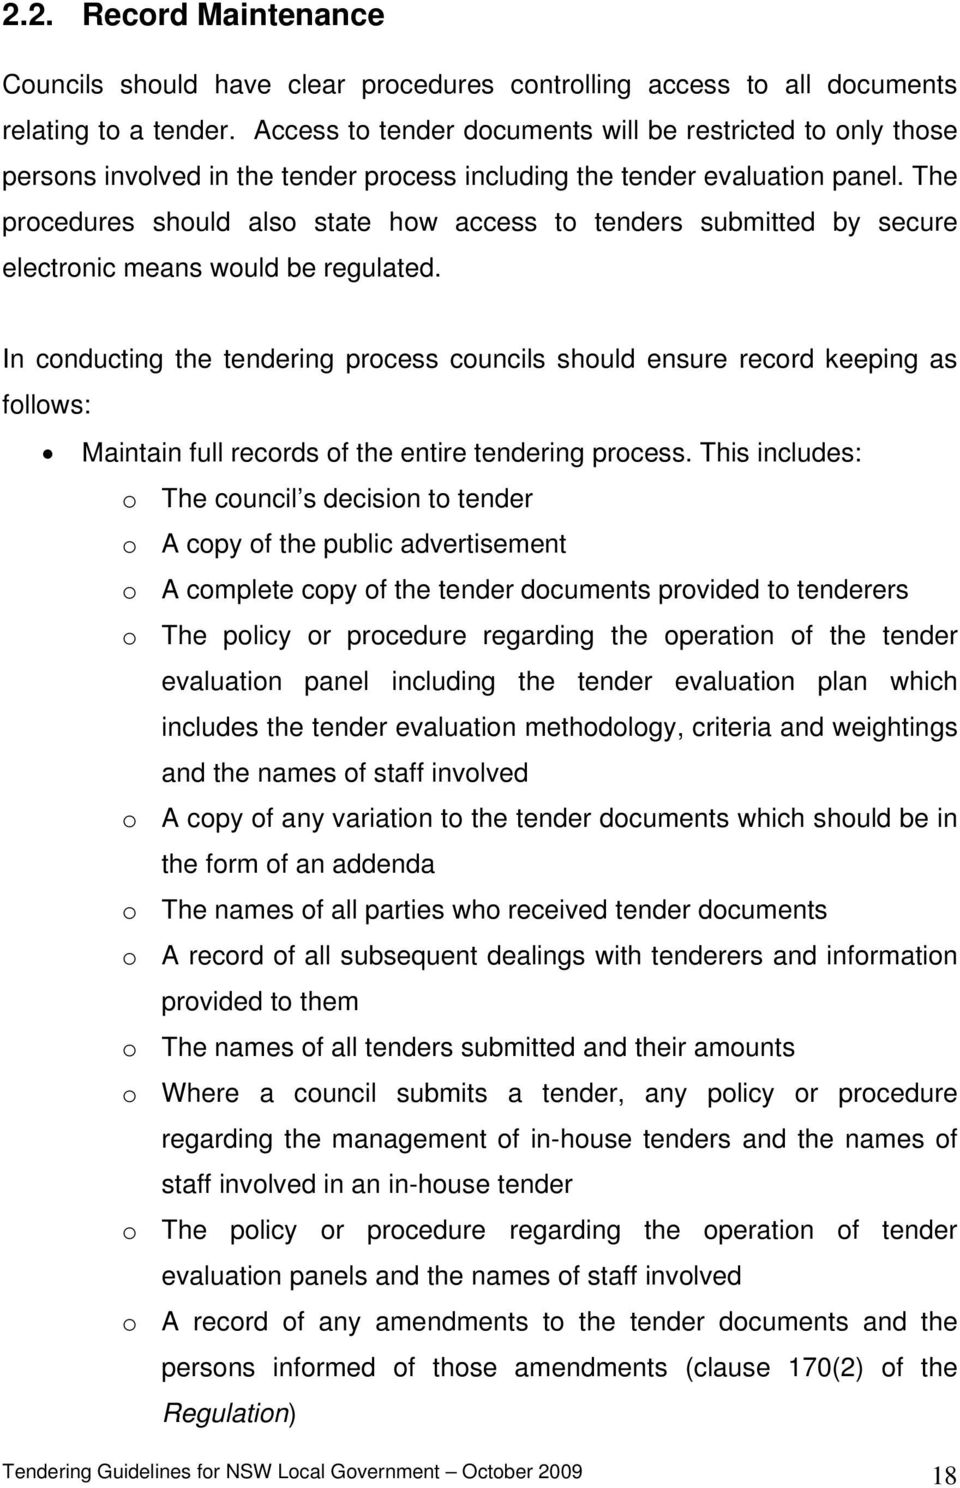 The procedures should also state how access to tenders submitted by secure electronic means would be regulated.